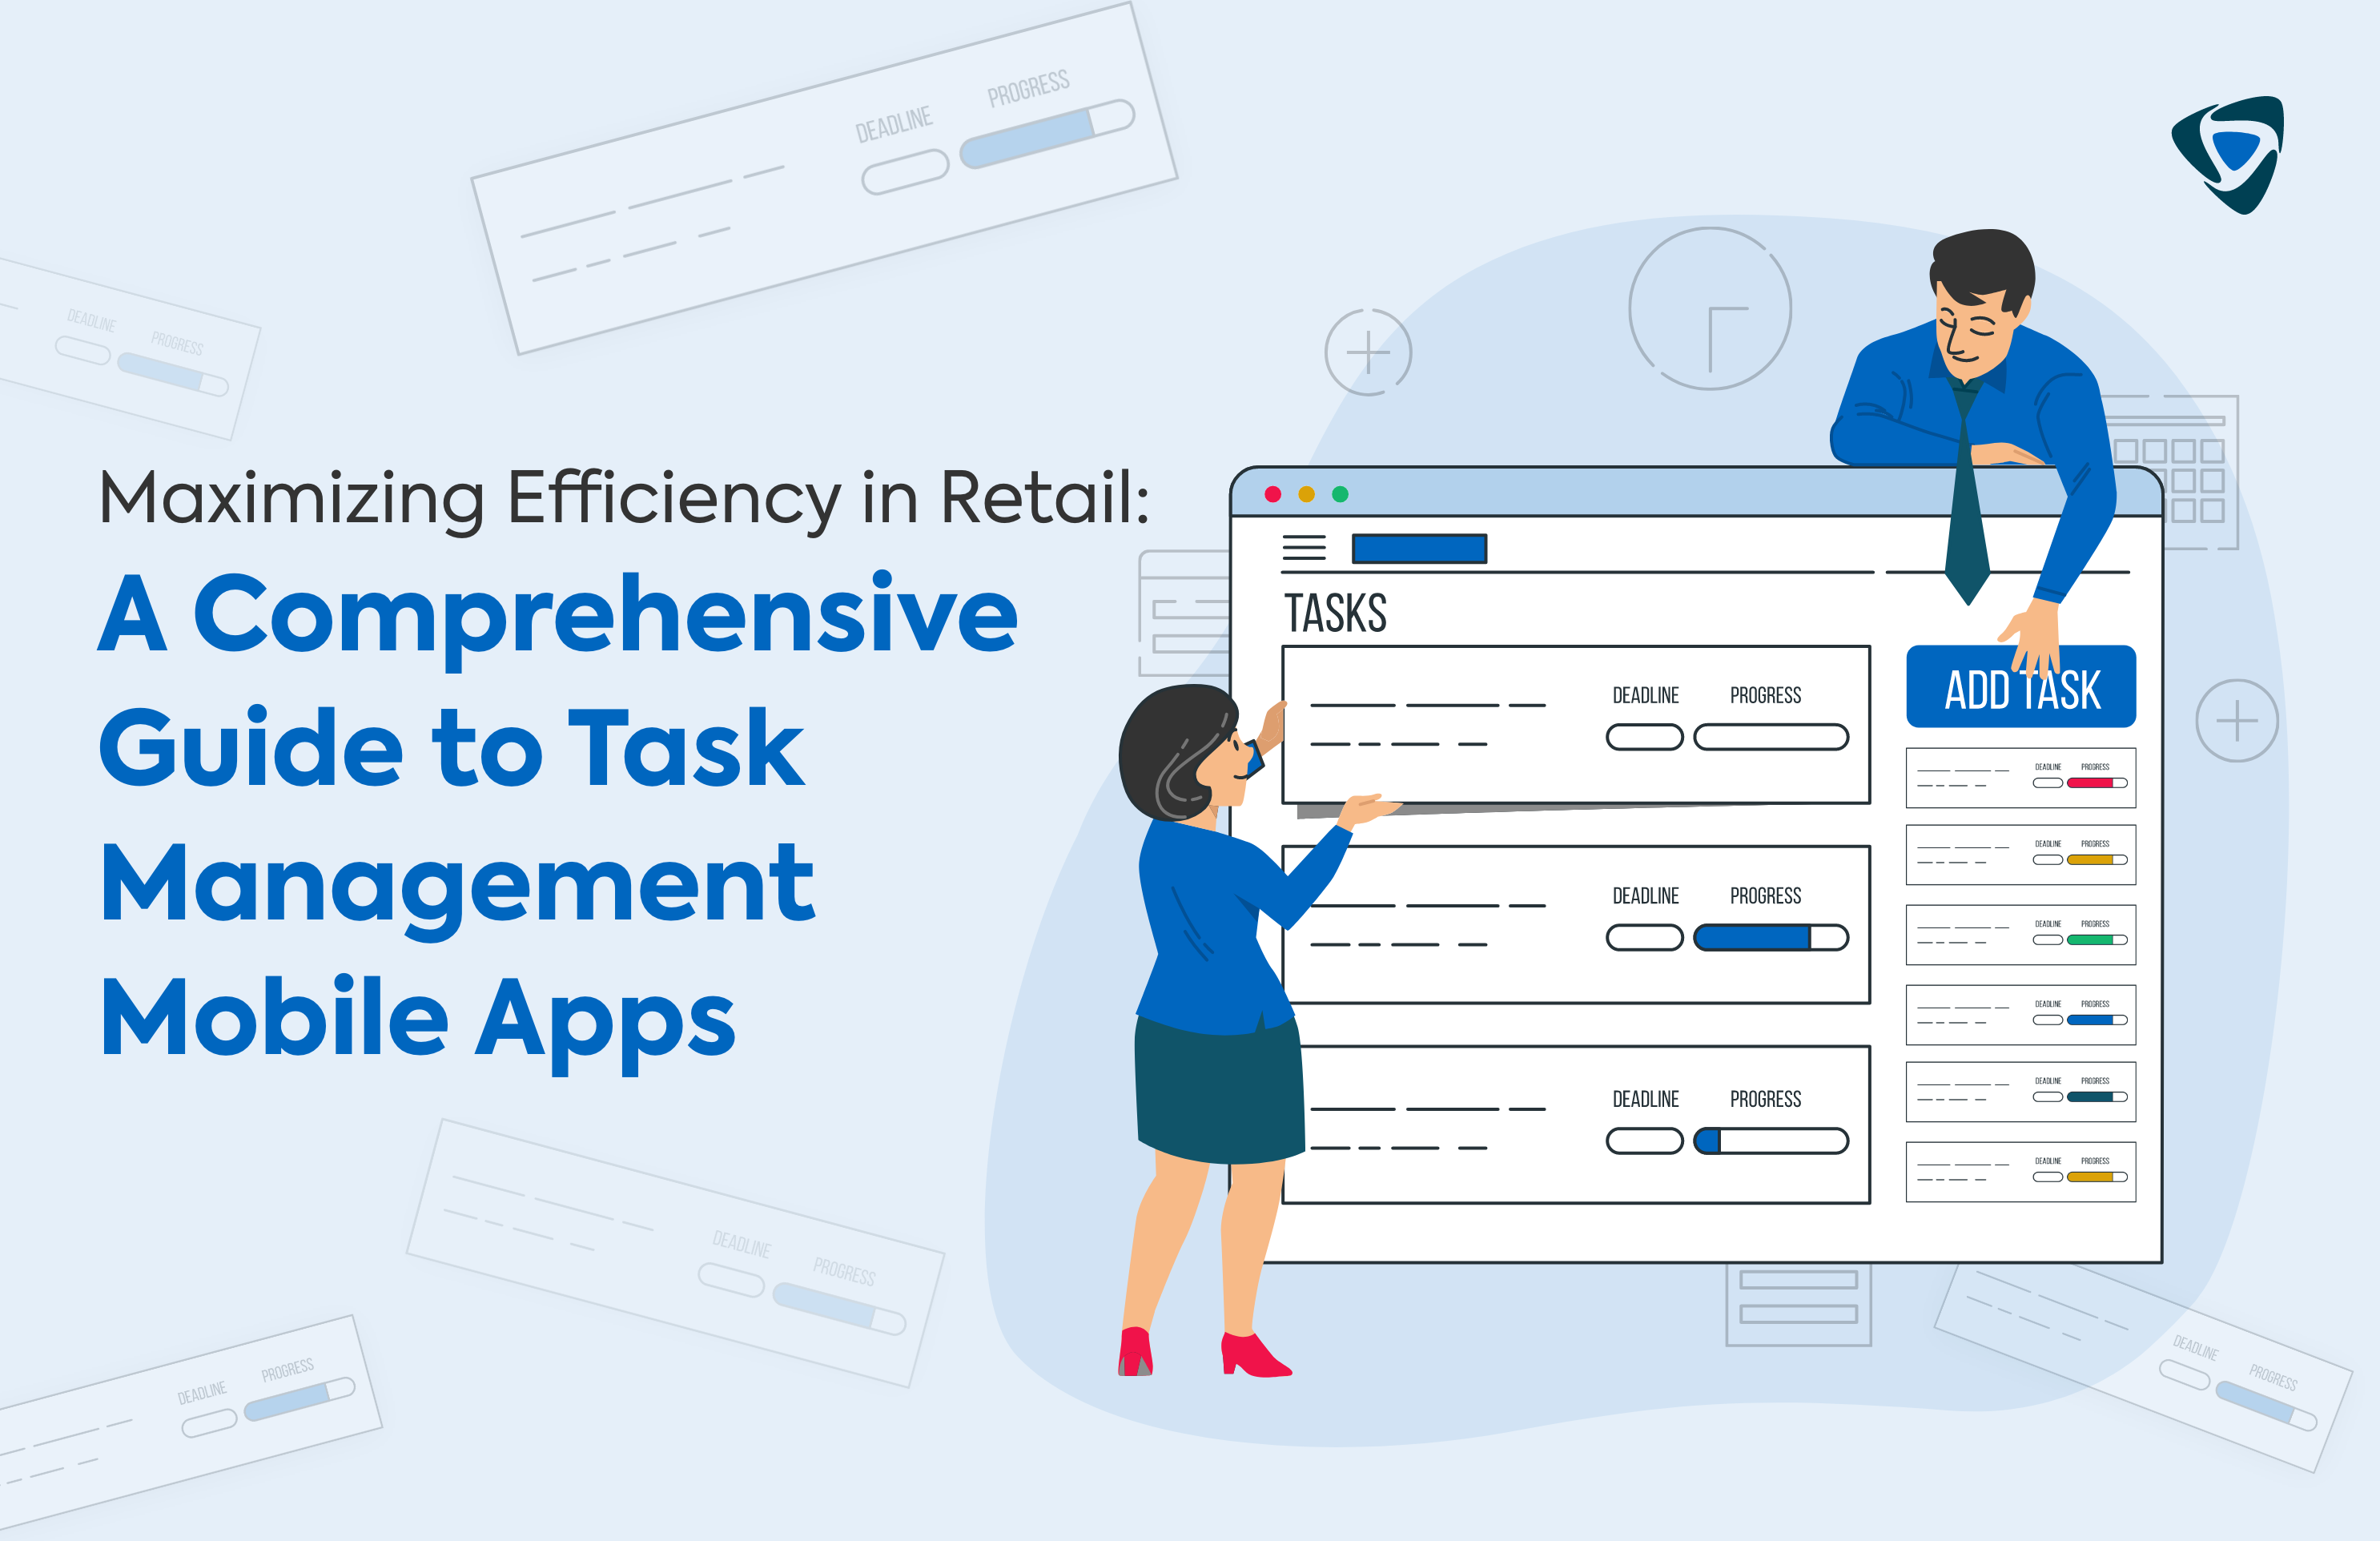 Maximizing Efficiency in Retail: A Comprehensive Guide to Task Management Mobile Apps